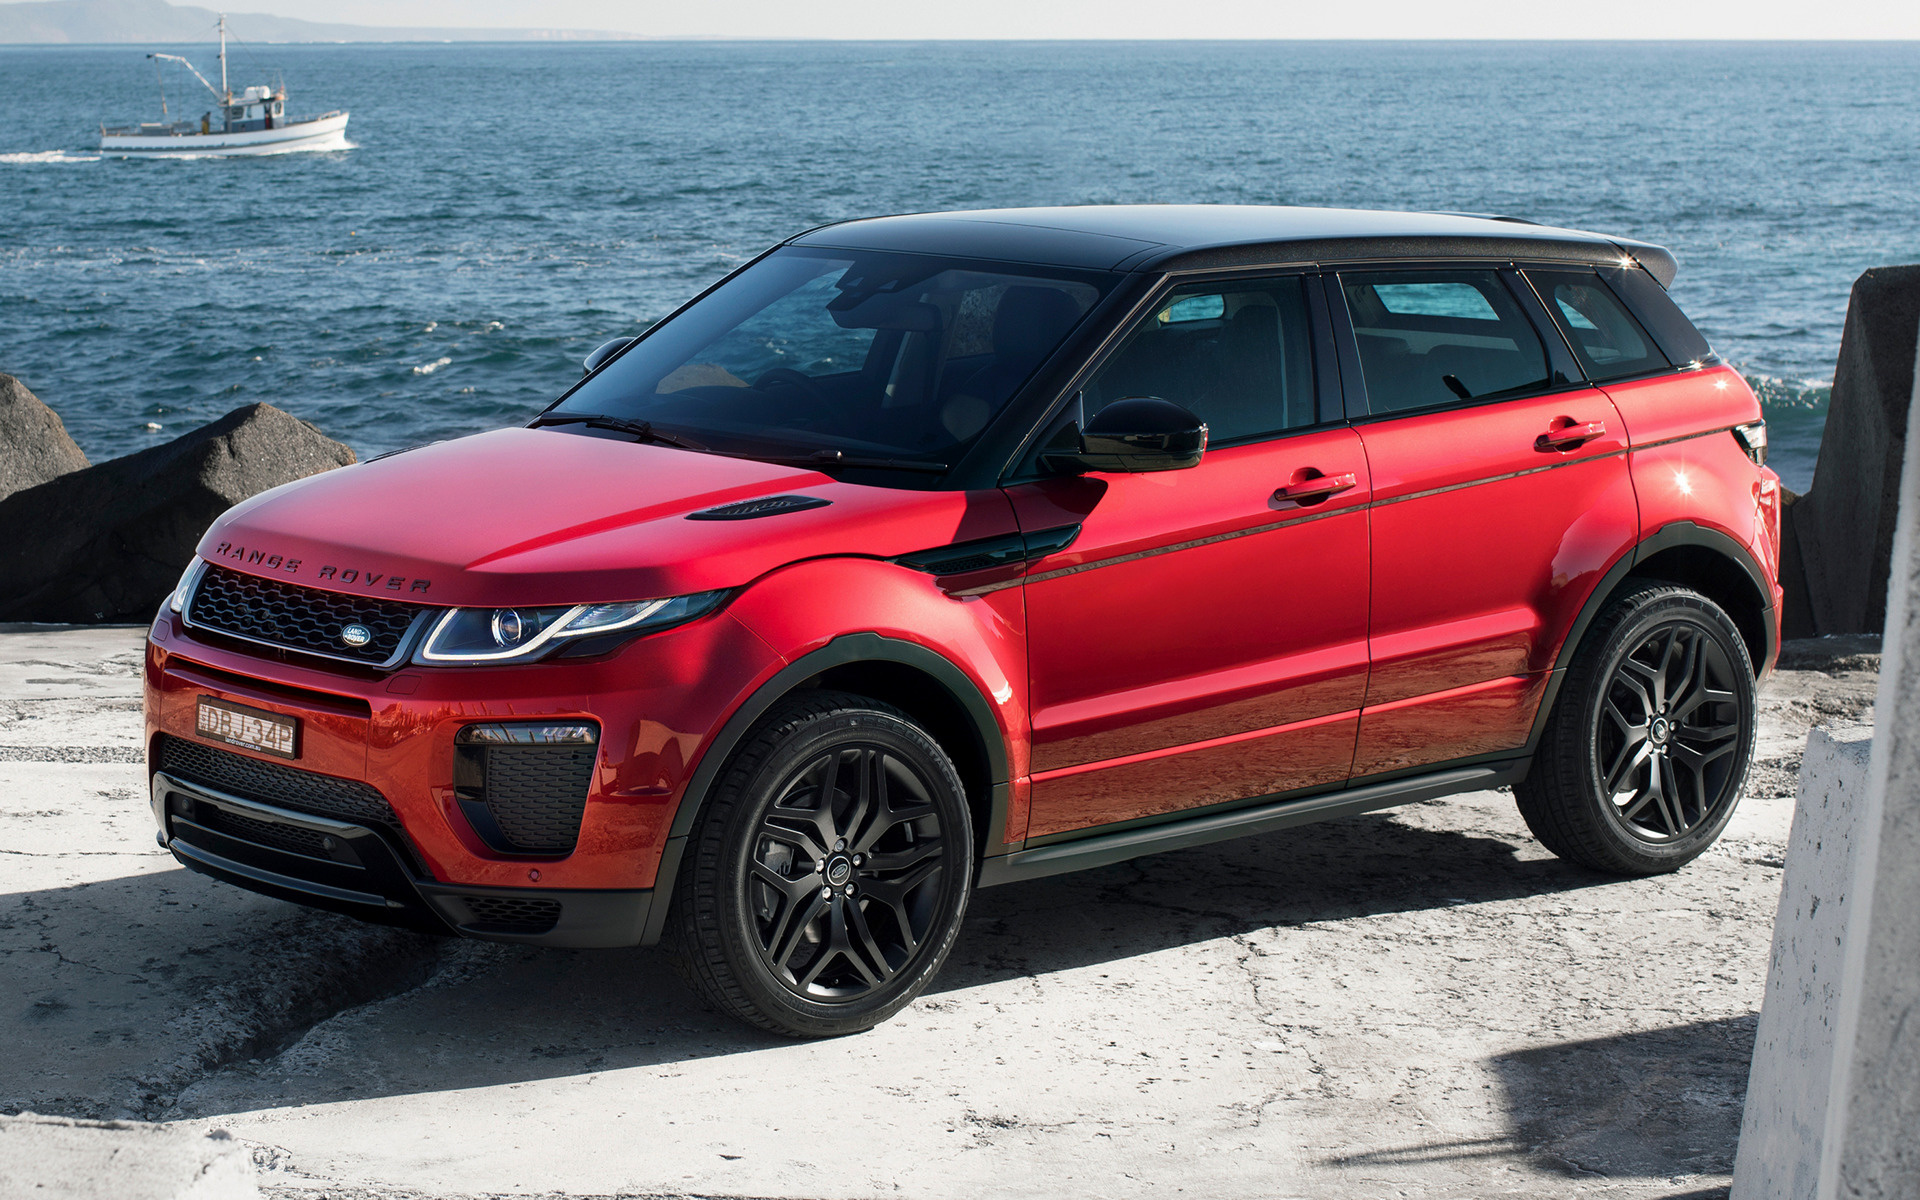 Range Rover Evoque HSE Dynamic (2015) AU Wallpapers and HD Images